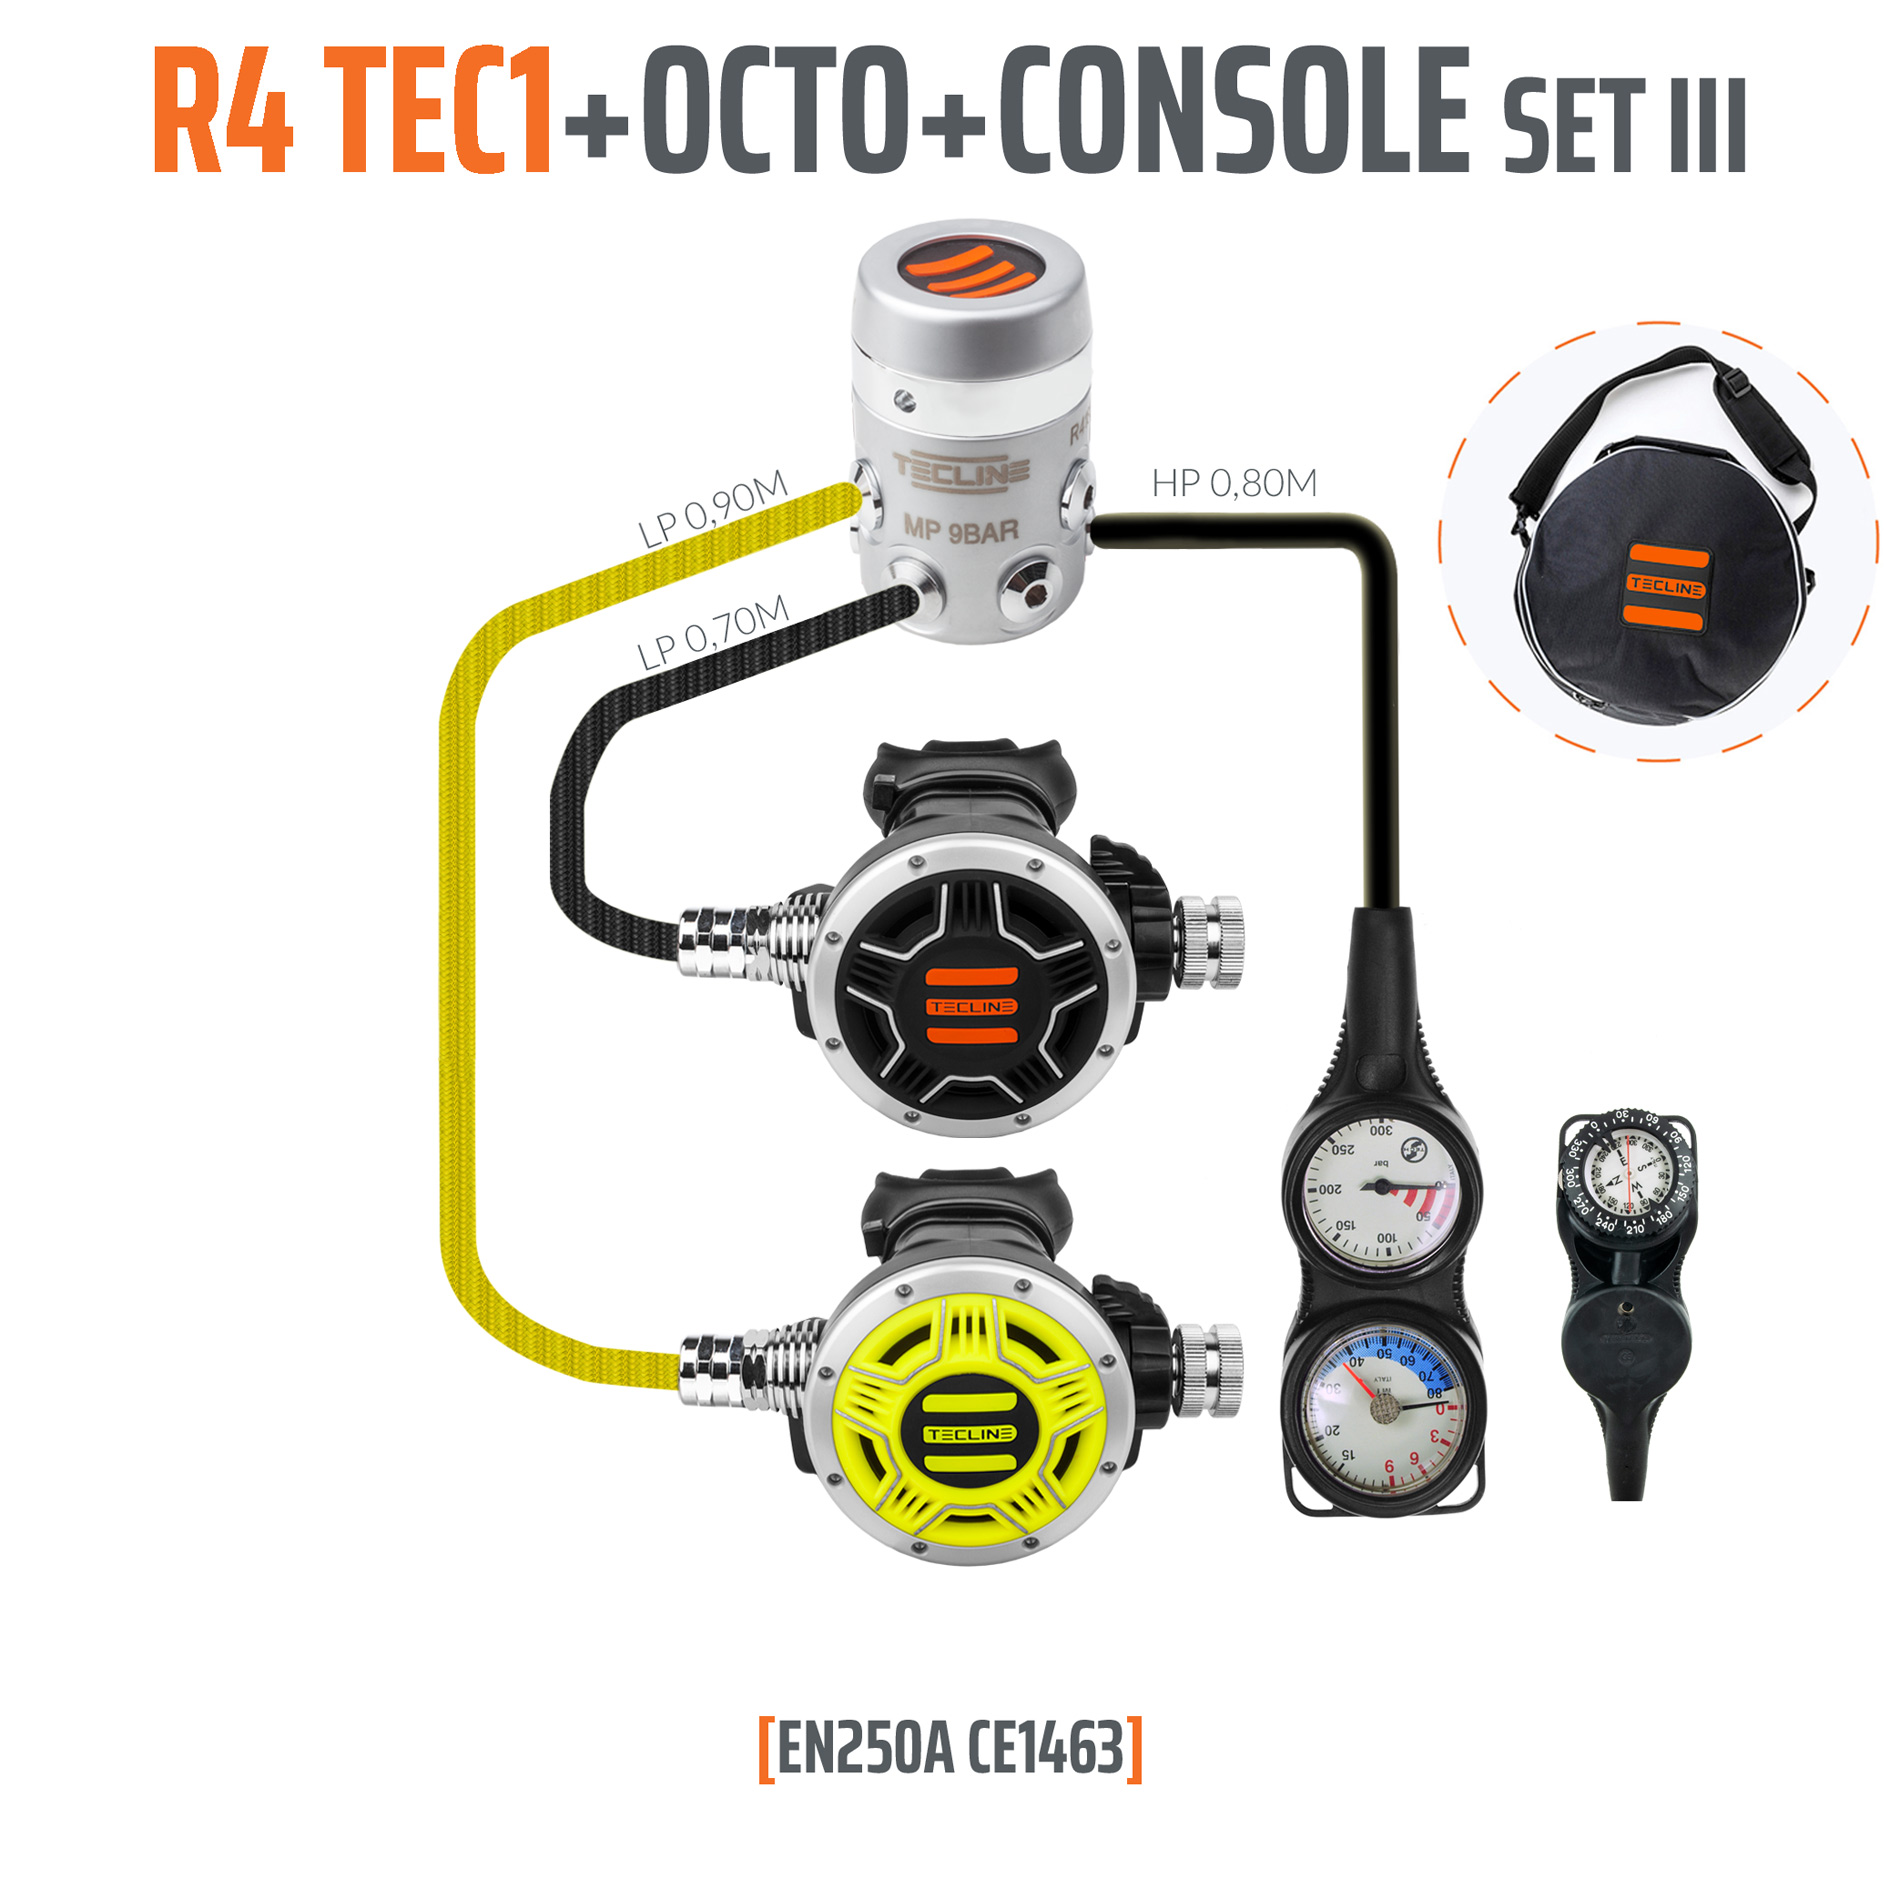 Tecline Regulator R4 TEC1 set III with octo and 3 elements console – EN250A